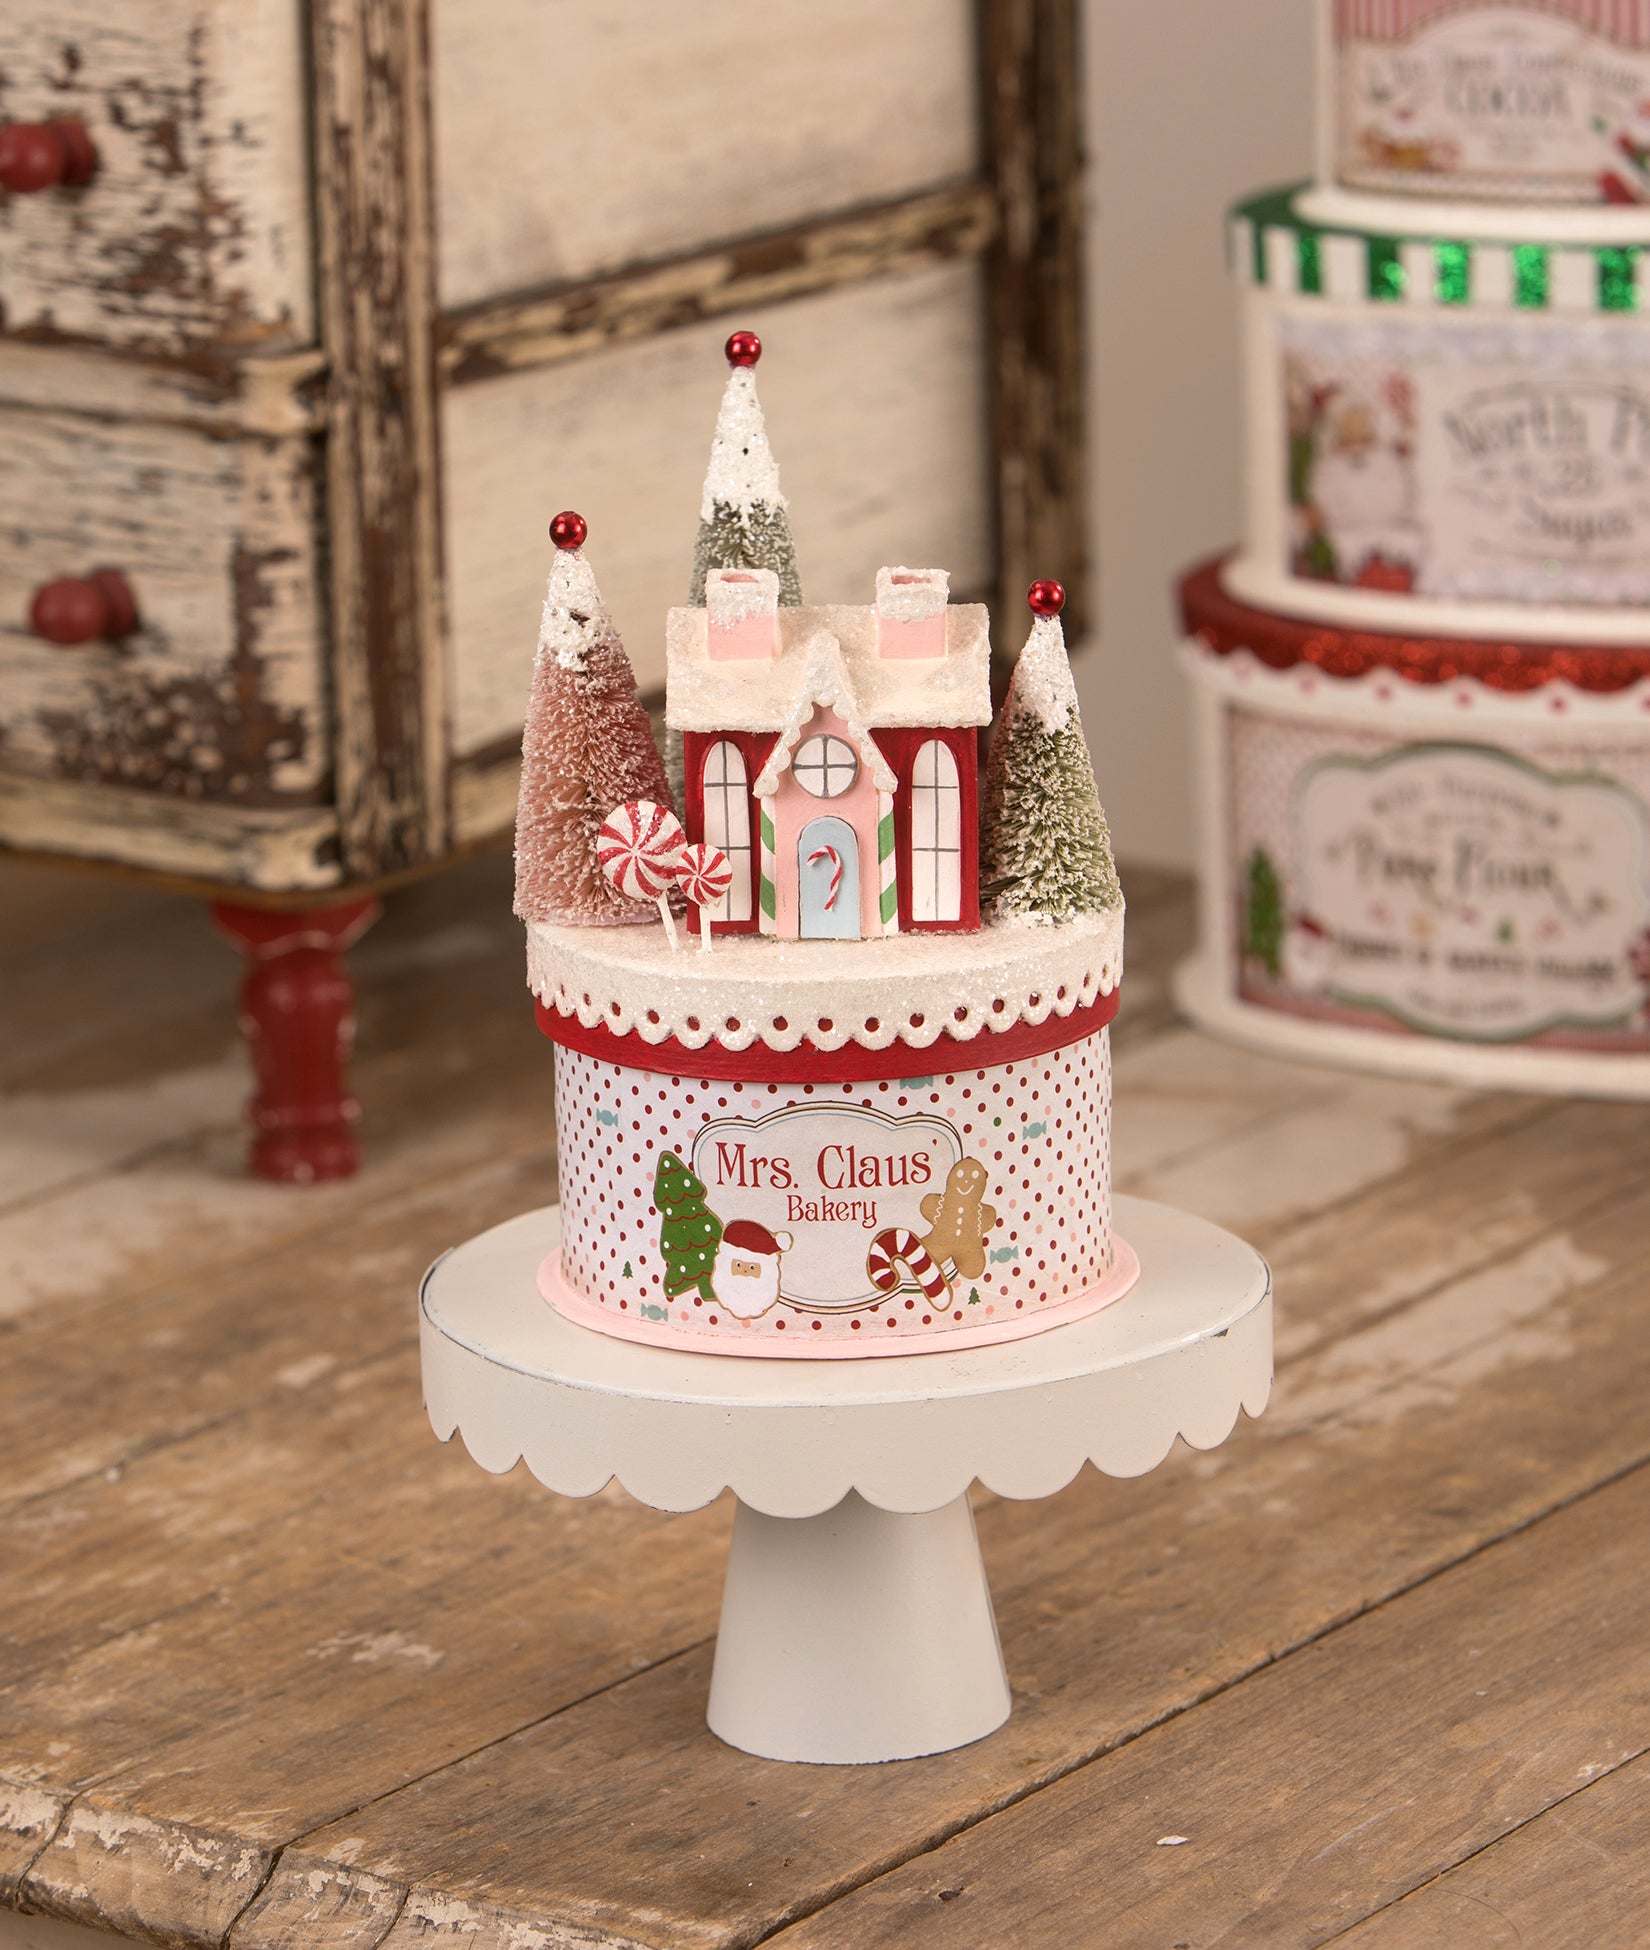 Mrs. Claus's Bakery on Box by Bethany Lowe